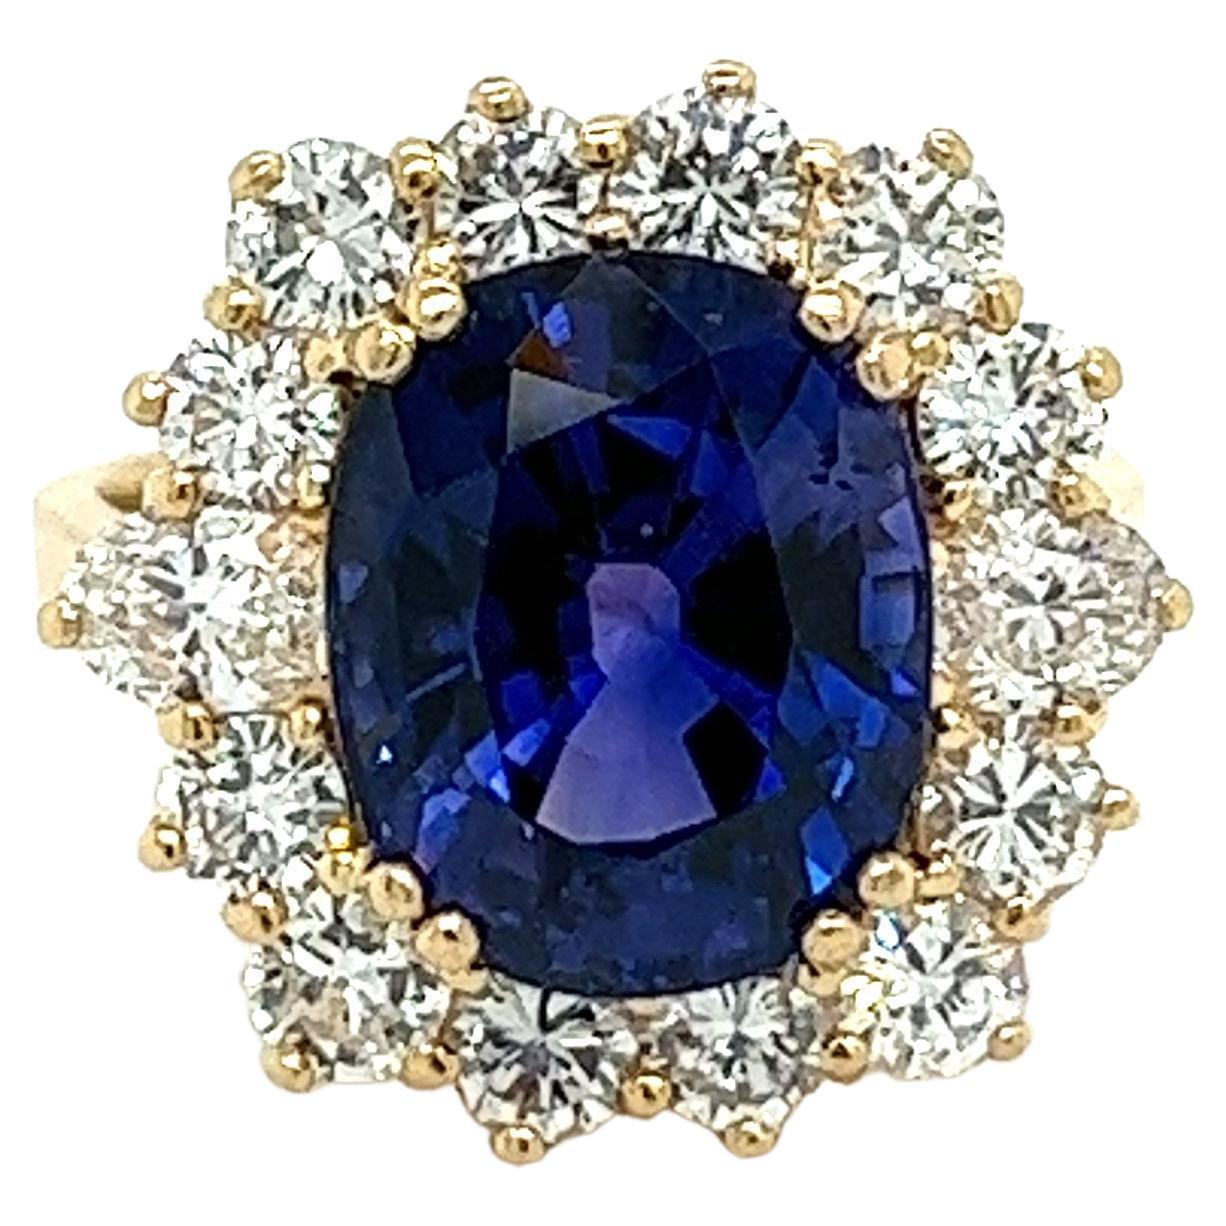 7.2 Carat Oval Cut Blue Sapphire & Diamond Halo Ring in 14K Yellow Gold For Sale